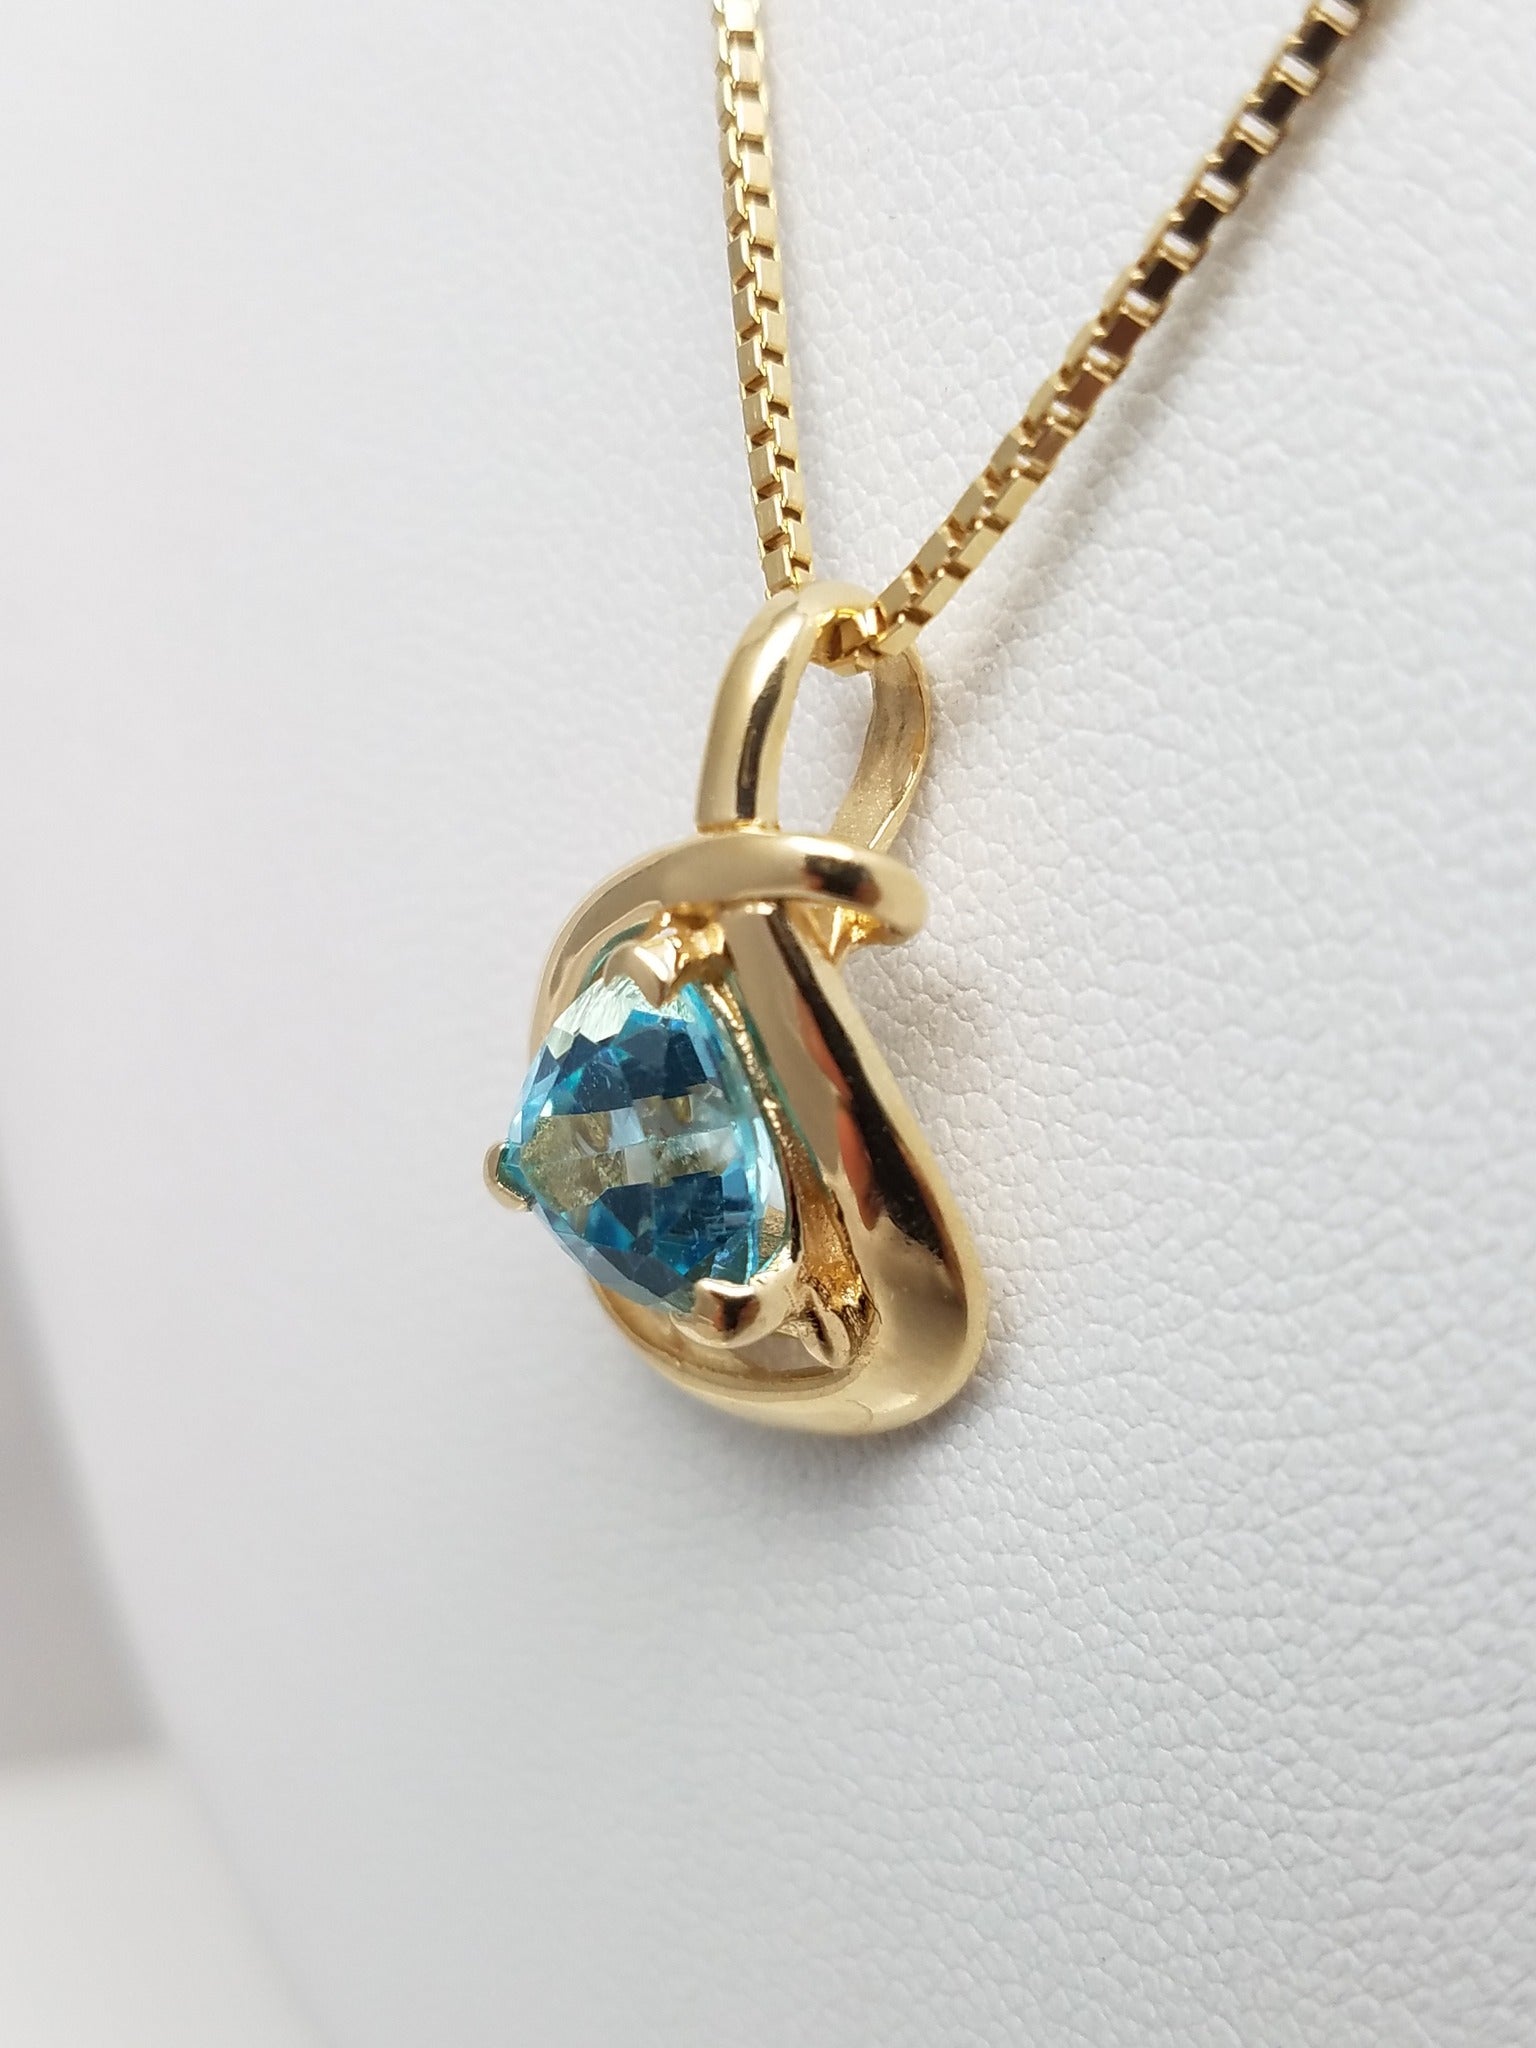 18" 14k Solid Yellow Gold Blue Topaz Pendant